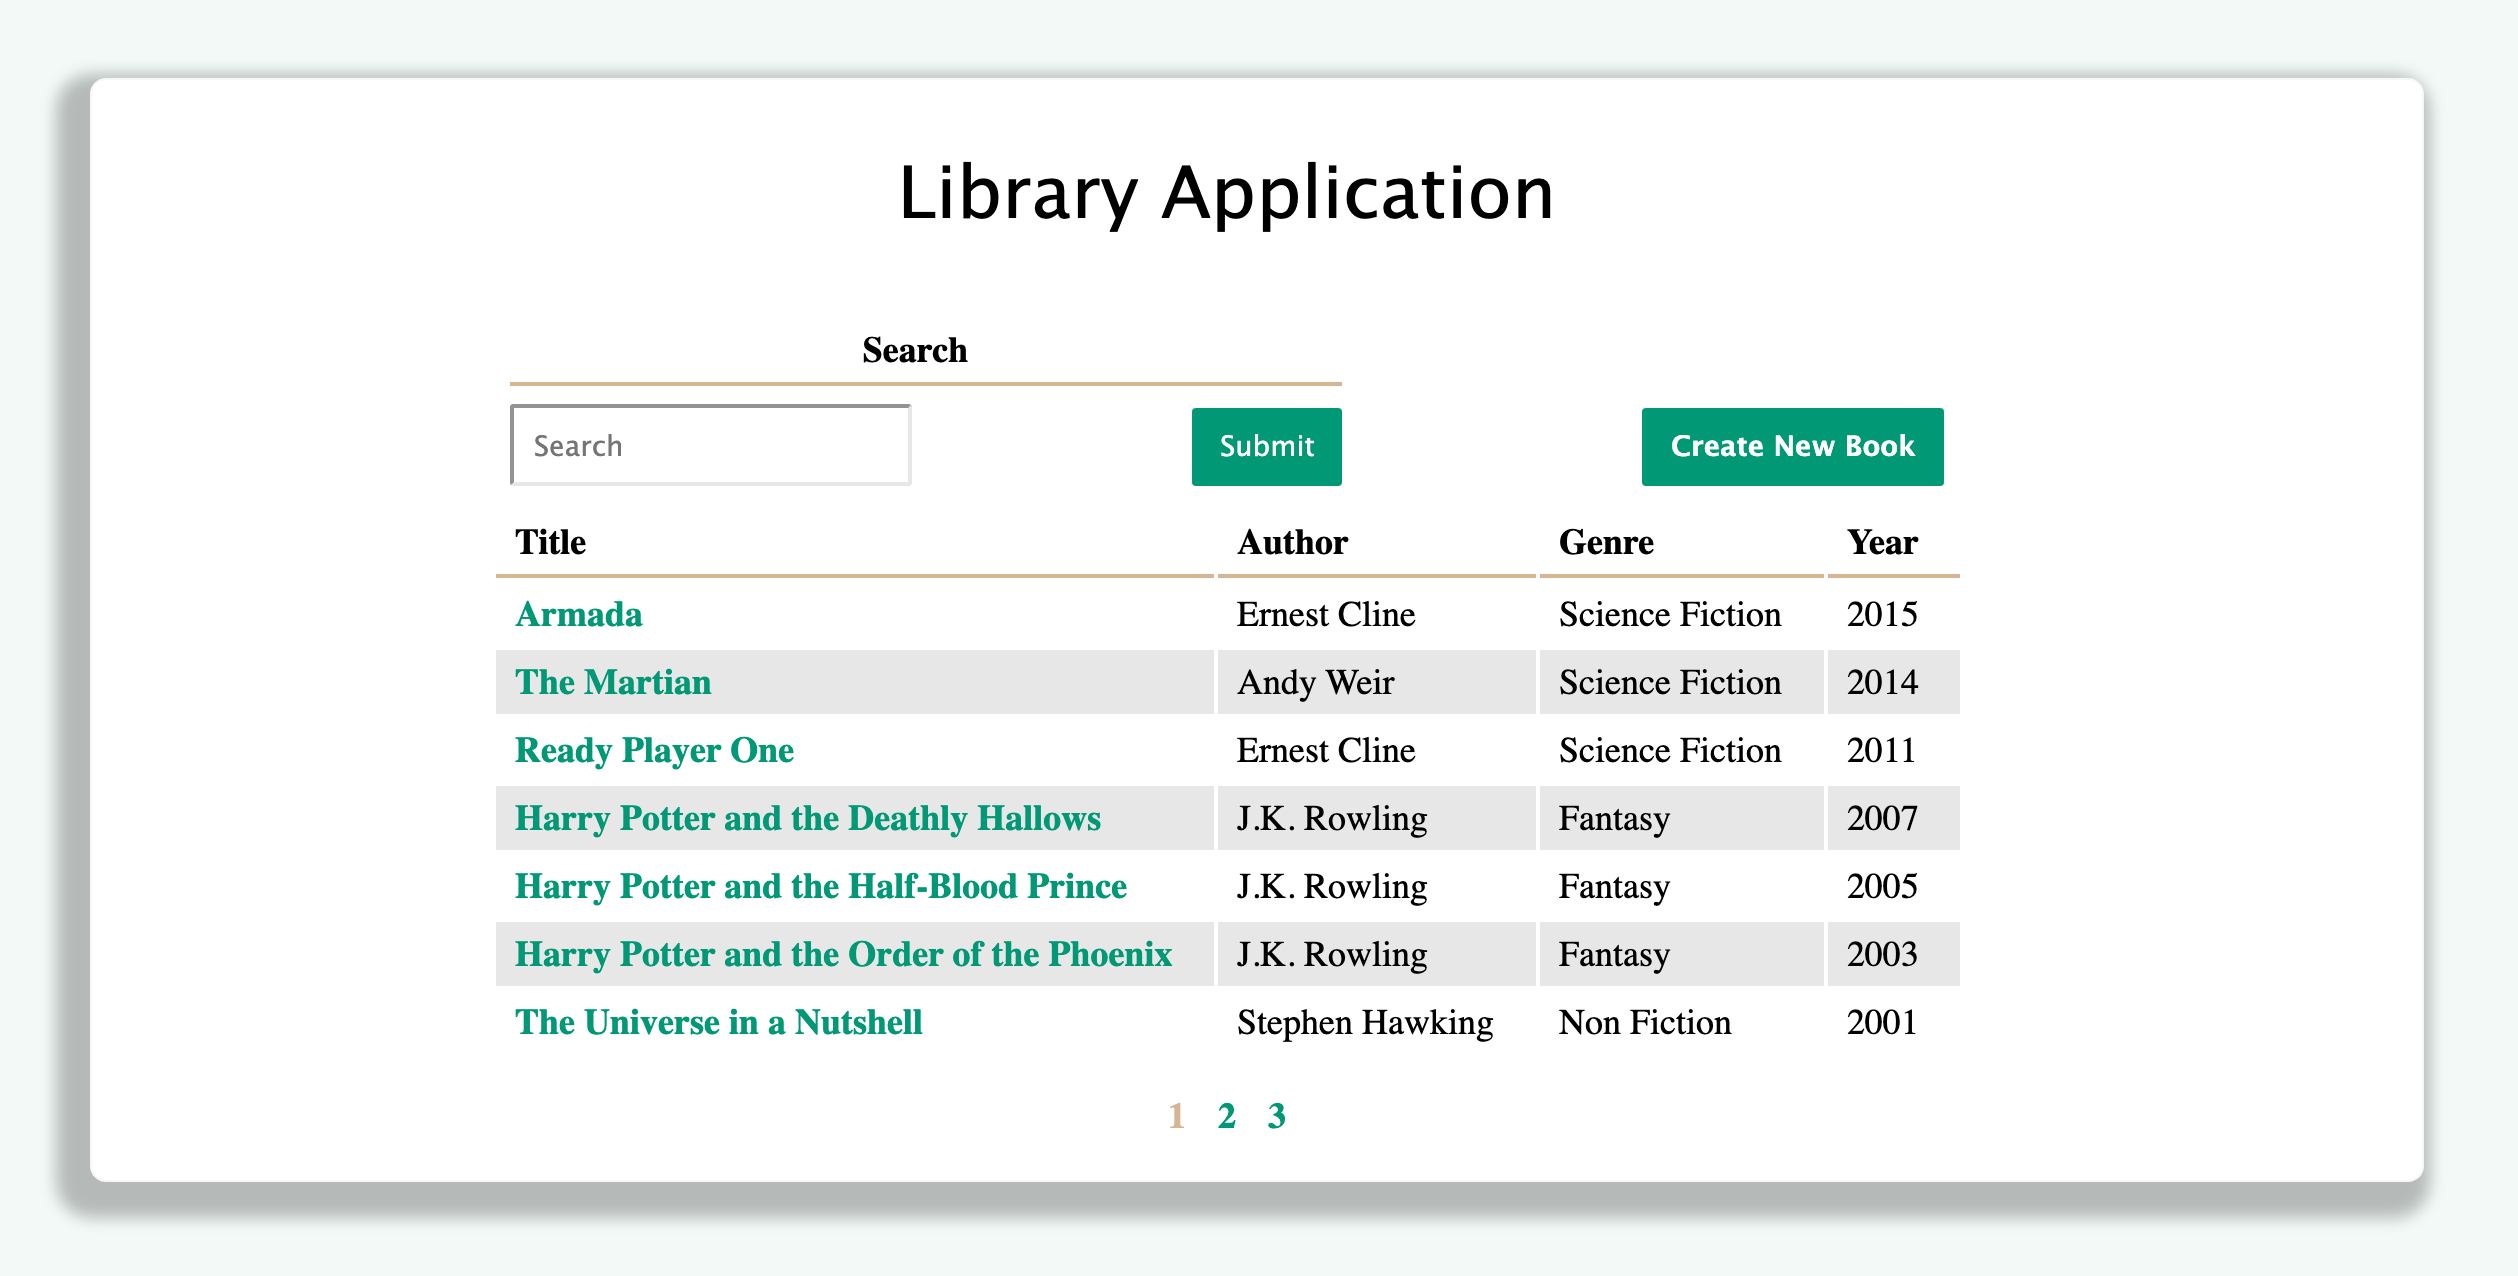 A user-friendly database application built with SQL and the Sequelize ORM to create, read, update, and delete books in a database.